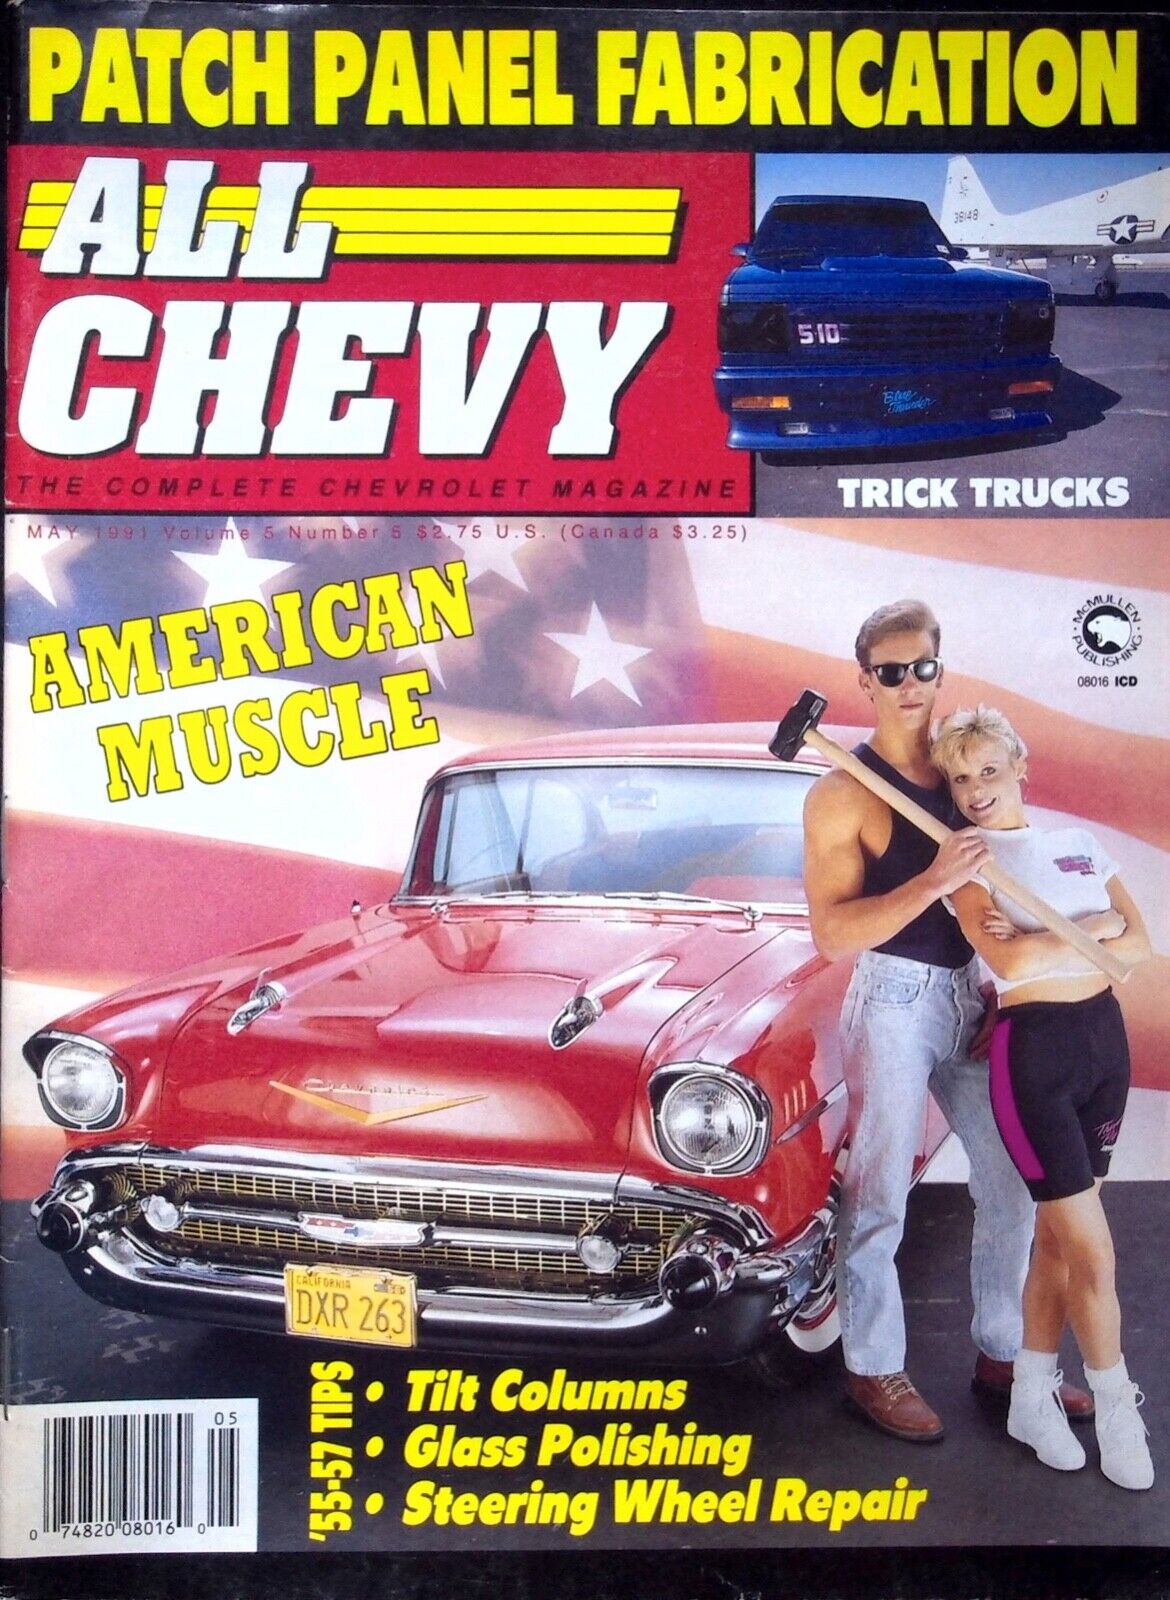 AMERICAN MUSCLE - ALL CHEVY MAGAZINE, MAY 1991